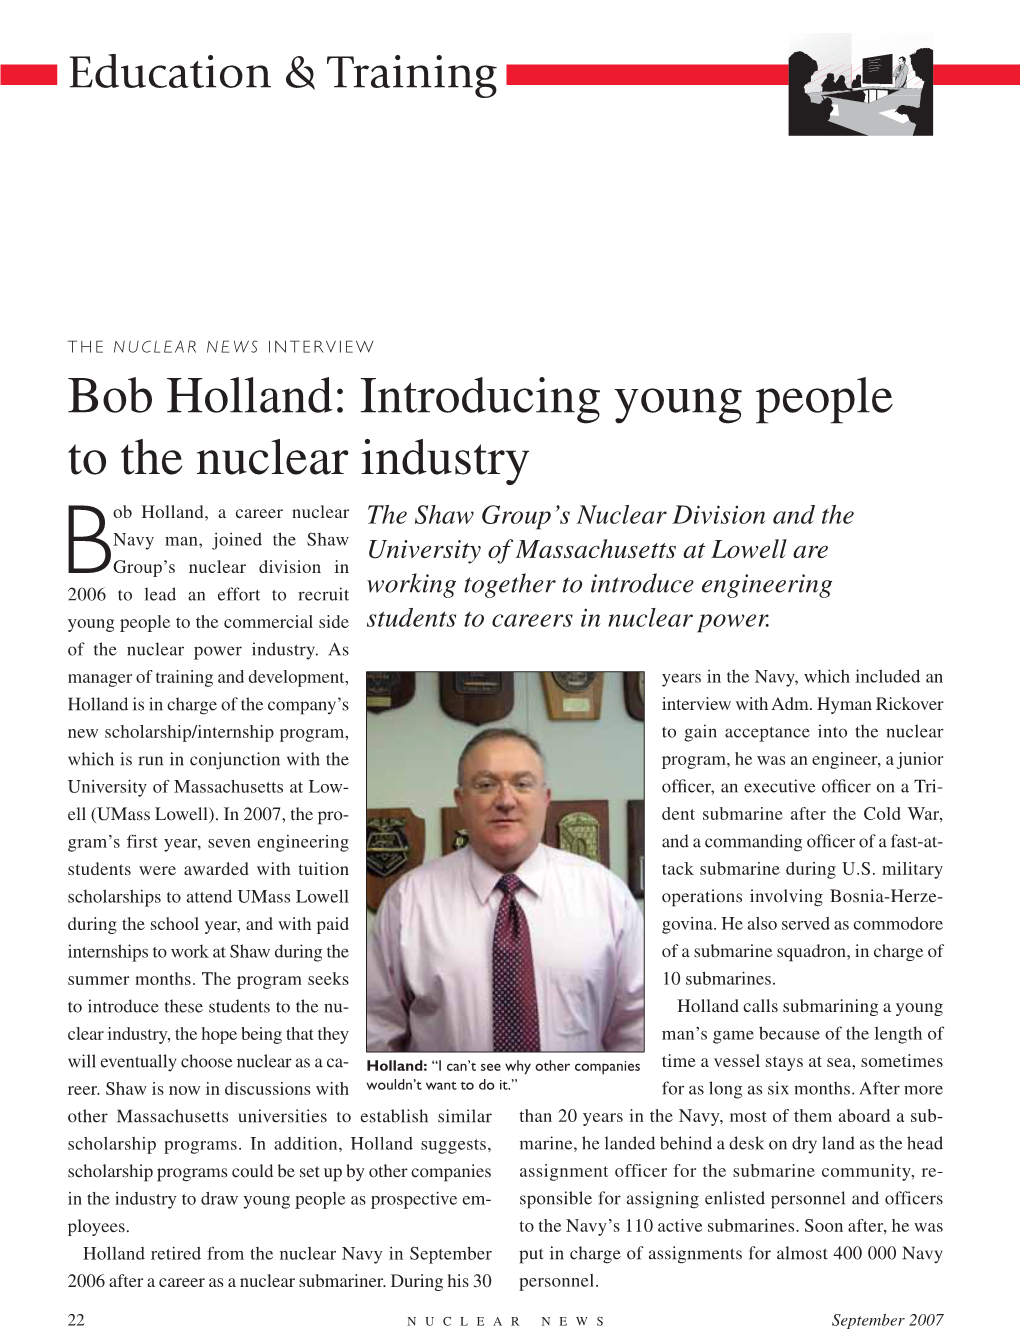 Bob Holland: Introducing Young People